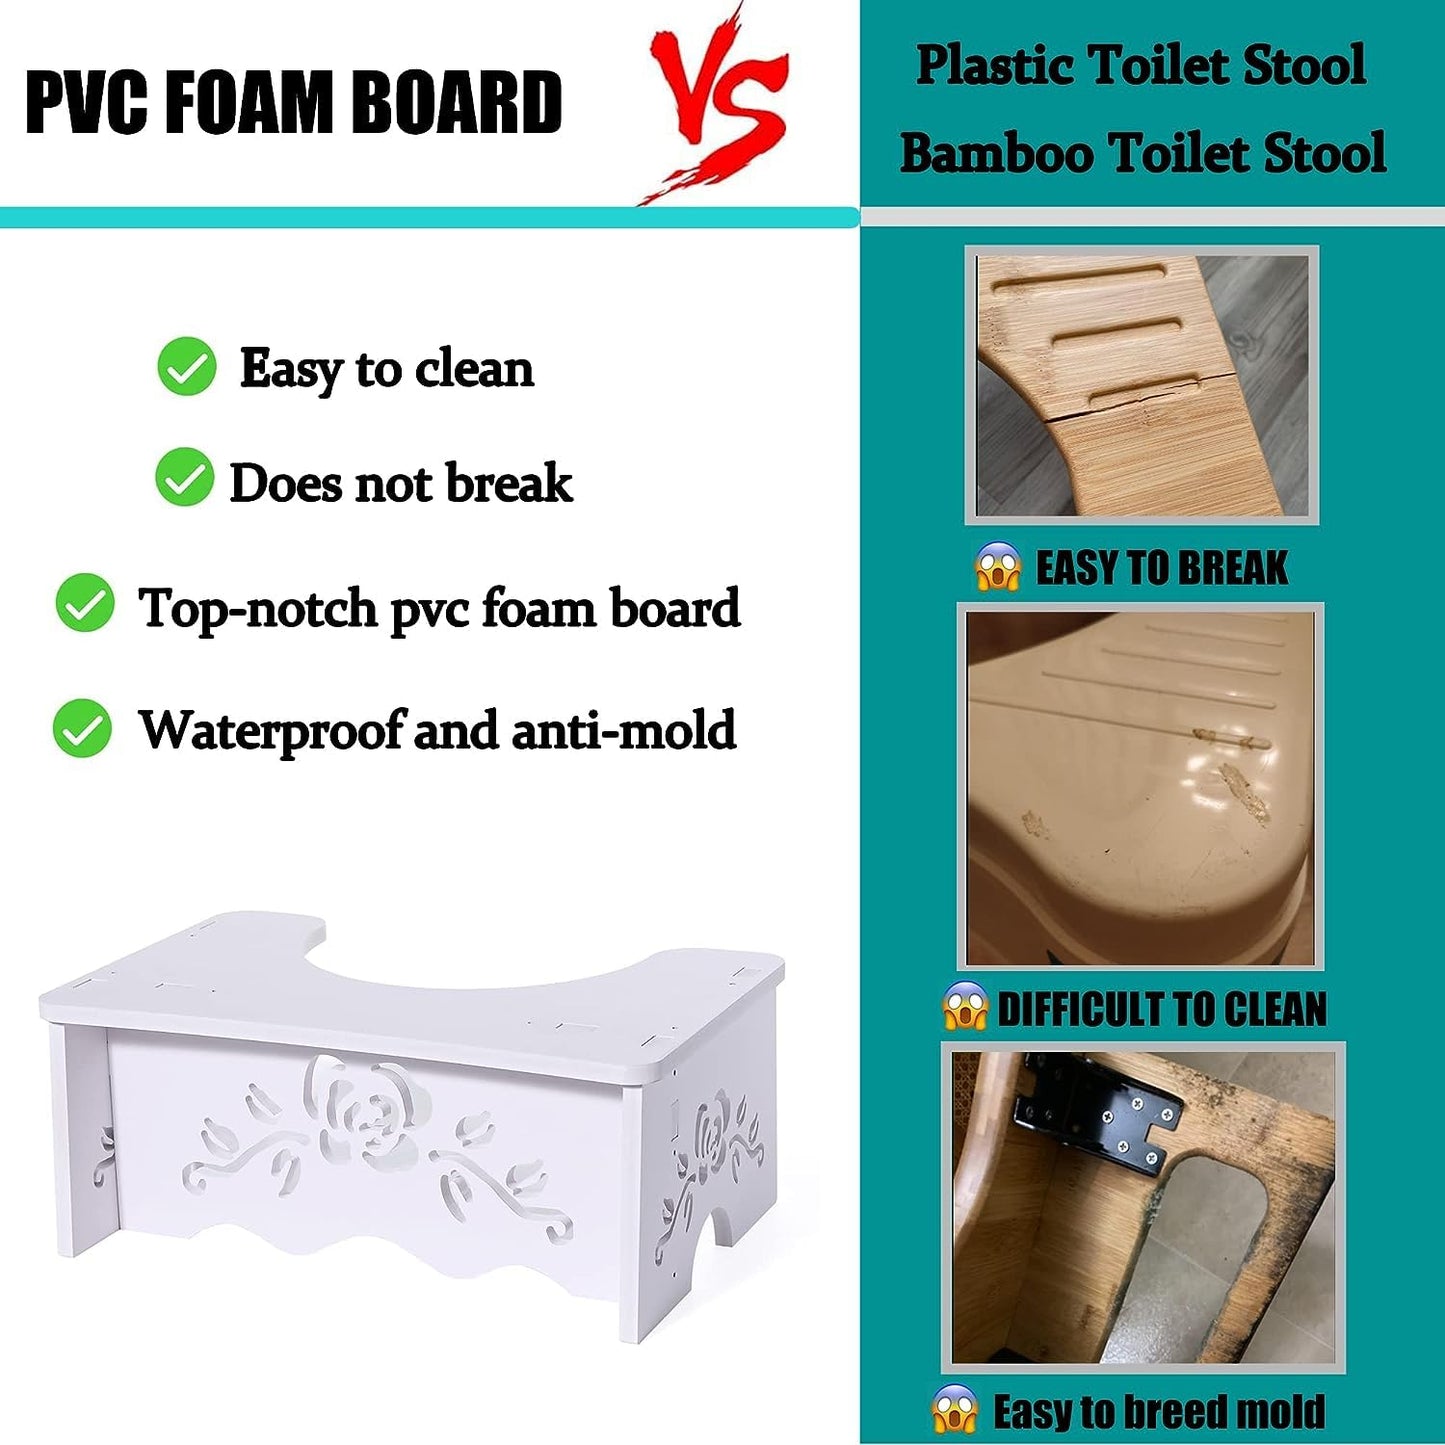 Fanwer Potty Stool for Pooping Made of Wood-Plastic Board for Adults, Suitable to Bring on Travel